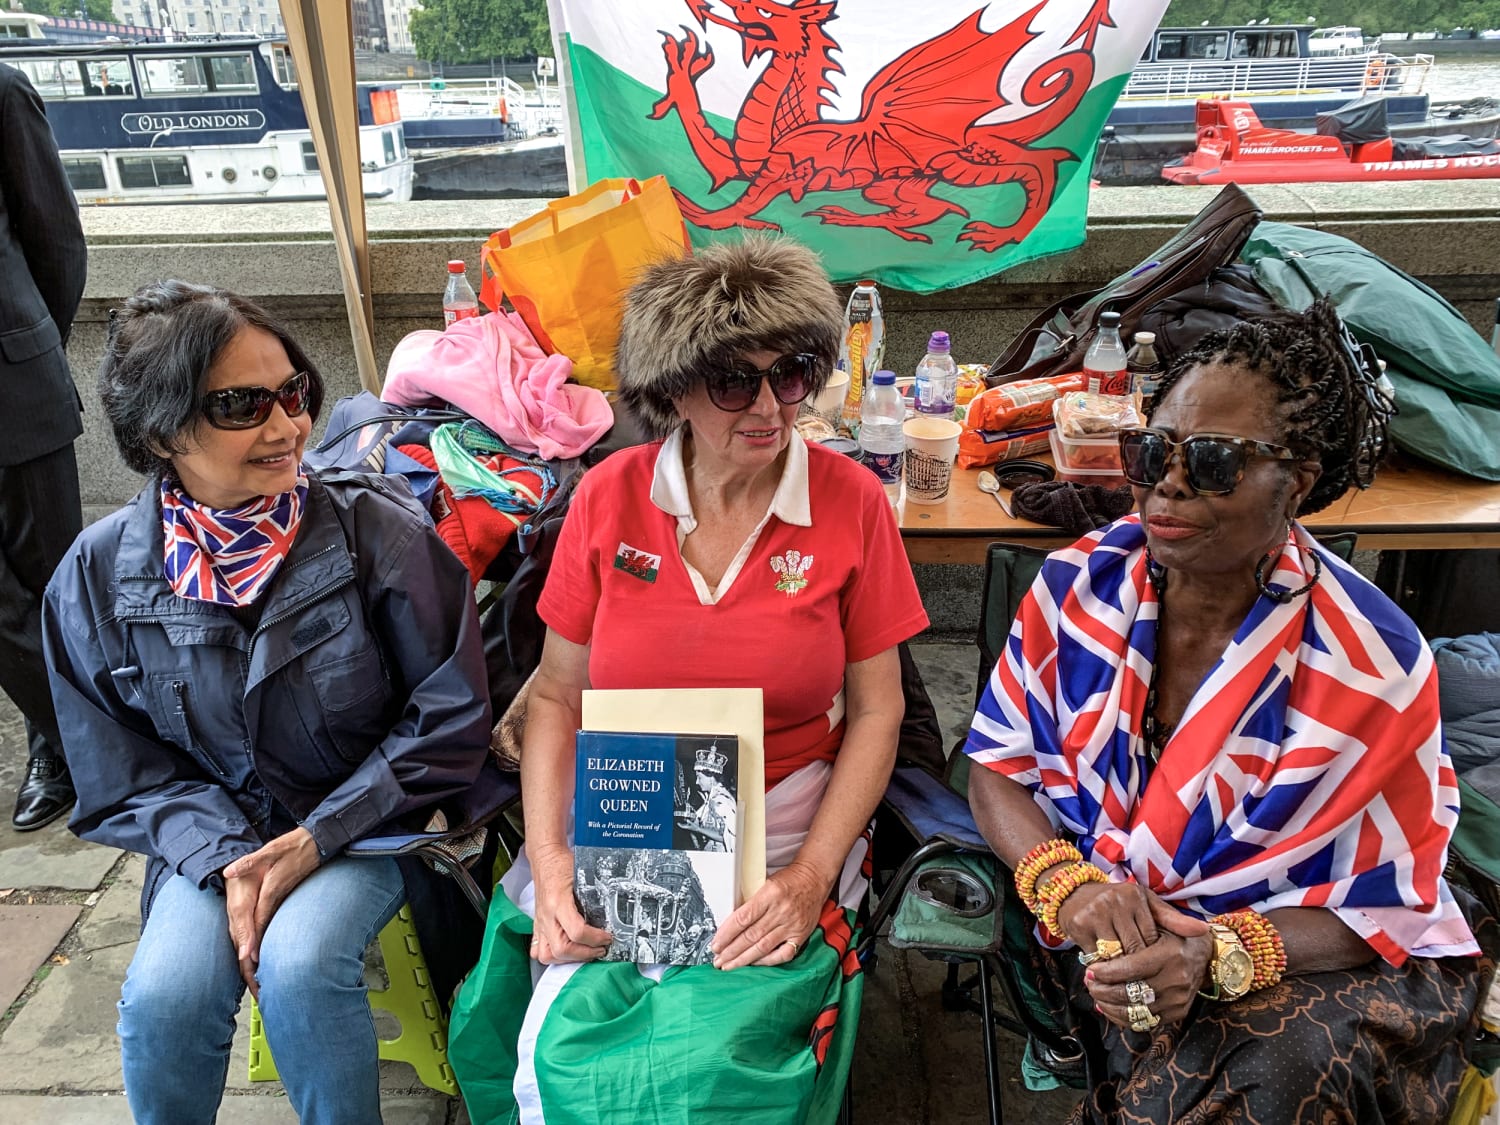 Meet the women who are the first in line to see the queen when she lies in state in London